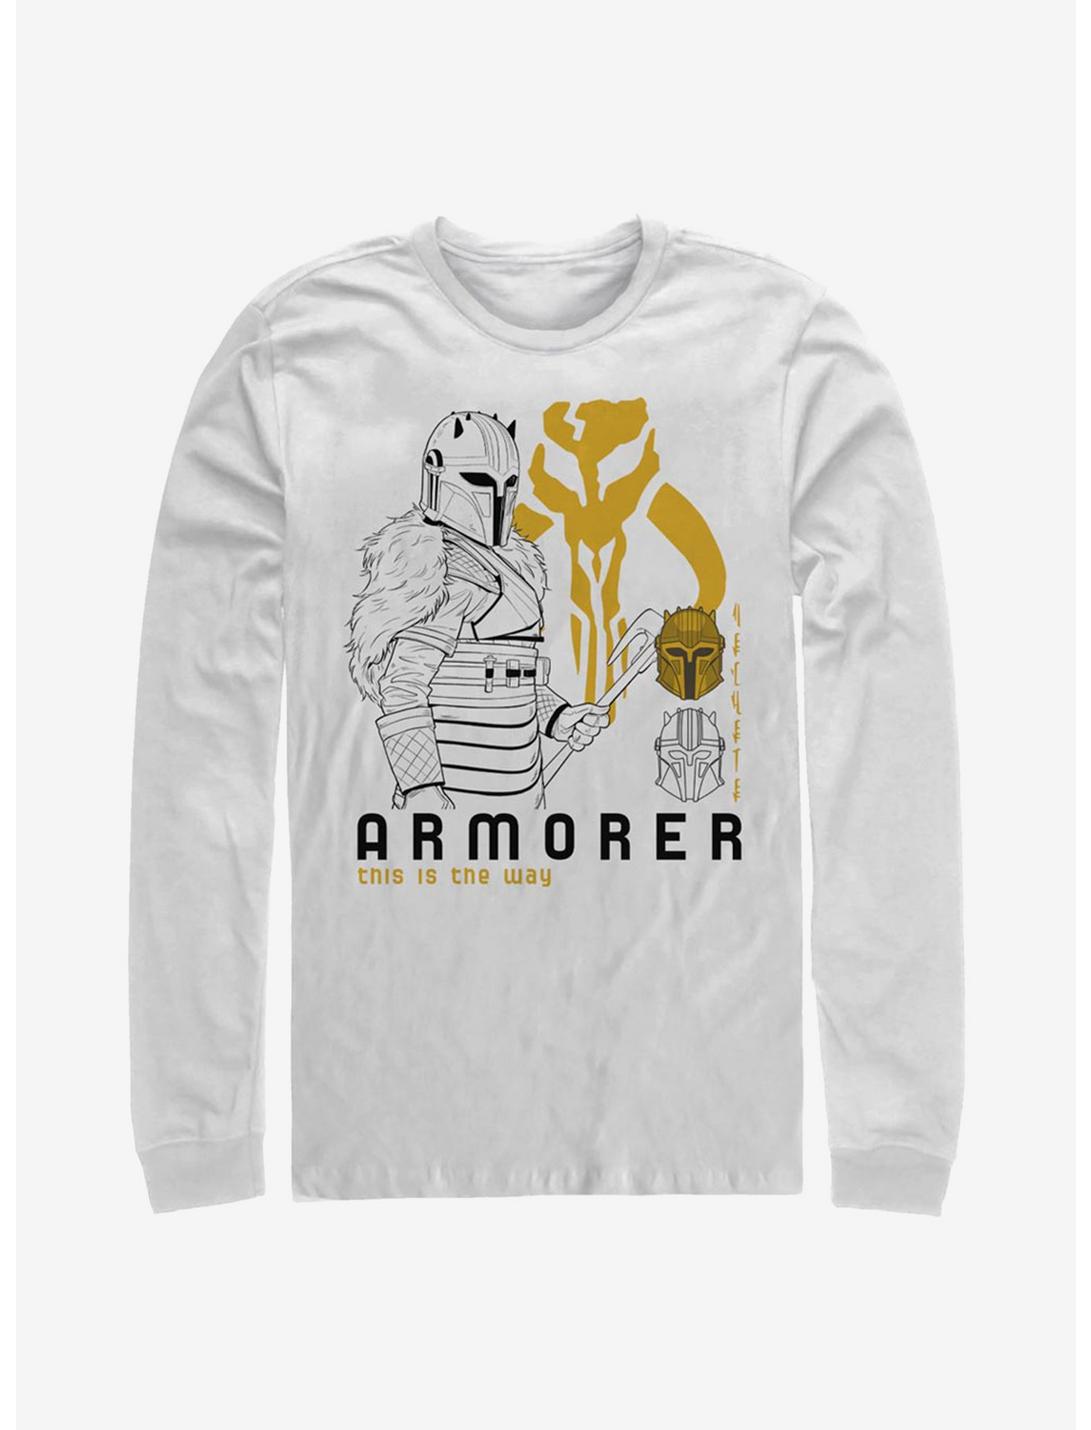 Star Wars The Mandalorian Armorer This Is The Way Long-Sleeve T-Shirt, WHITE, hi-res